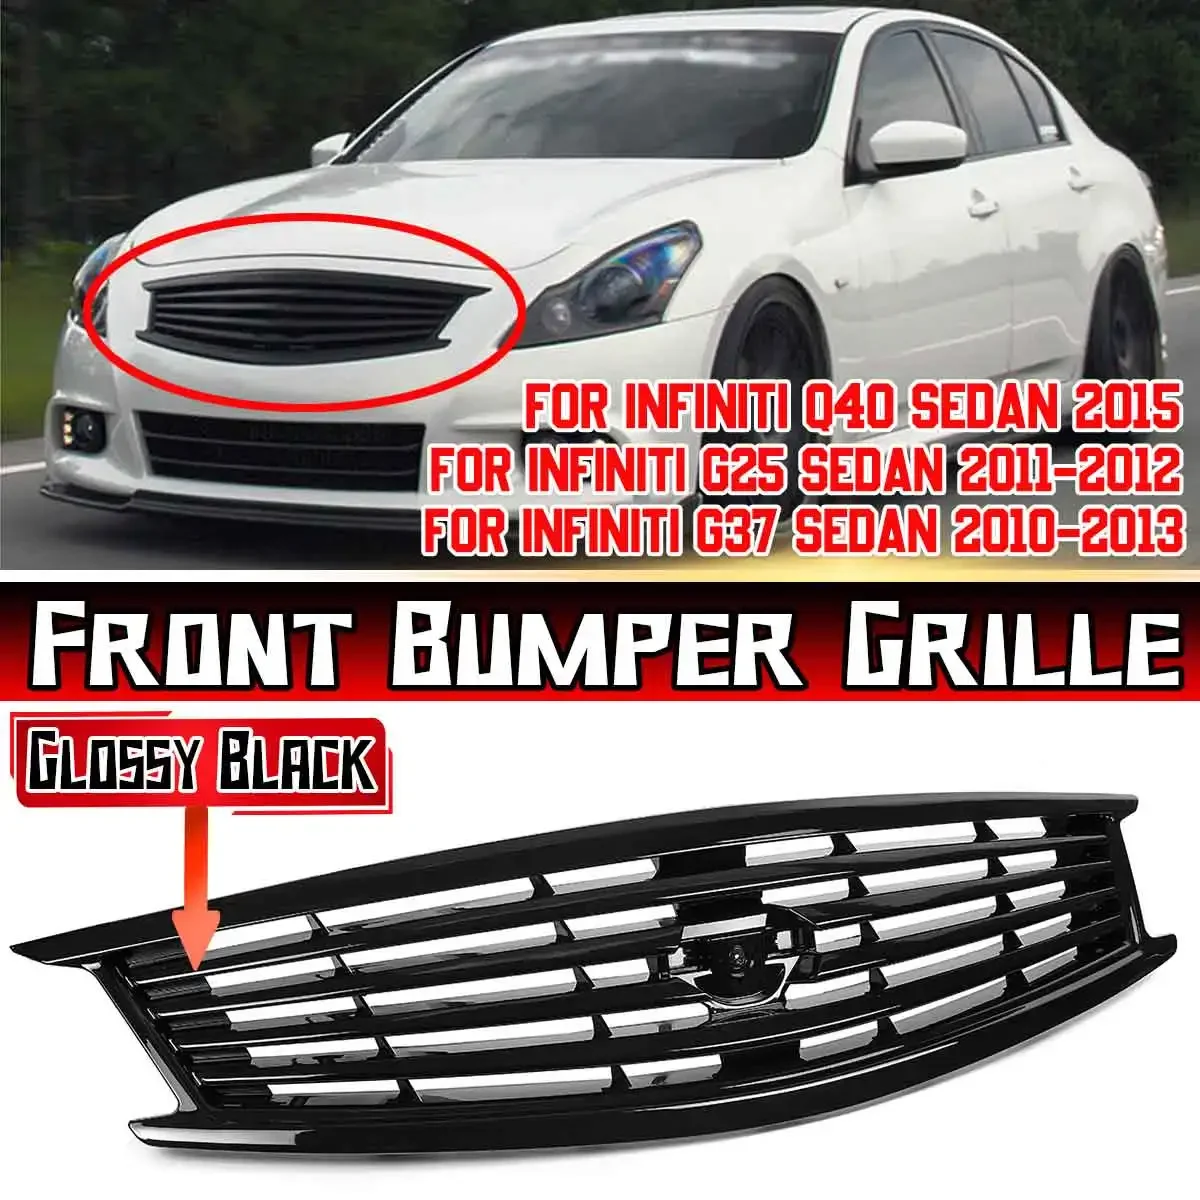 

New Front Bumper Radiator Grille For Infiniti G37 2010-2013 G25 2011-2012 Q40 2015 4Dr Sedan Front Grill Grille Racing Grills